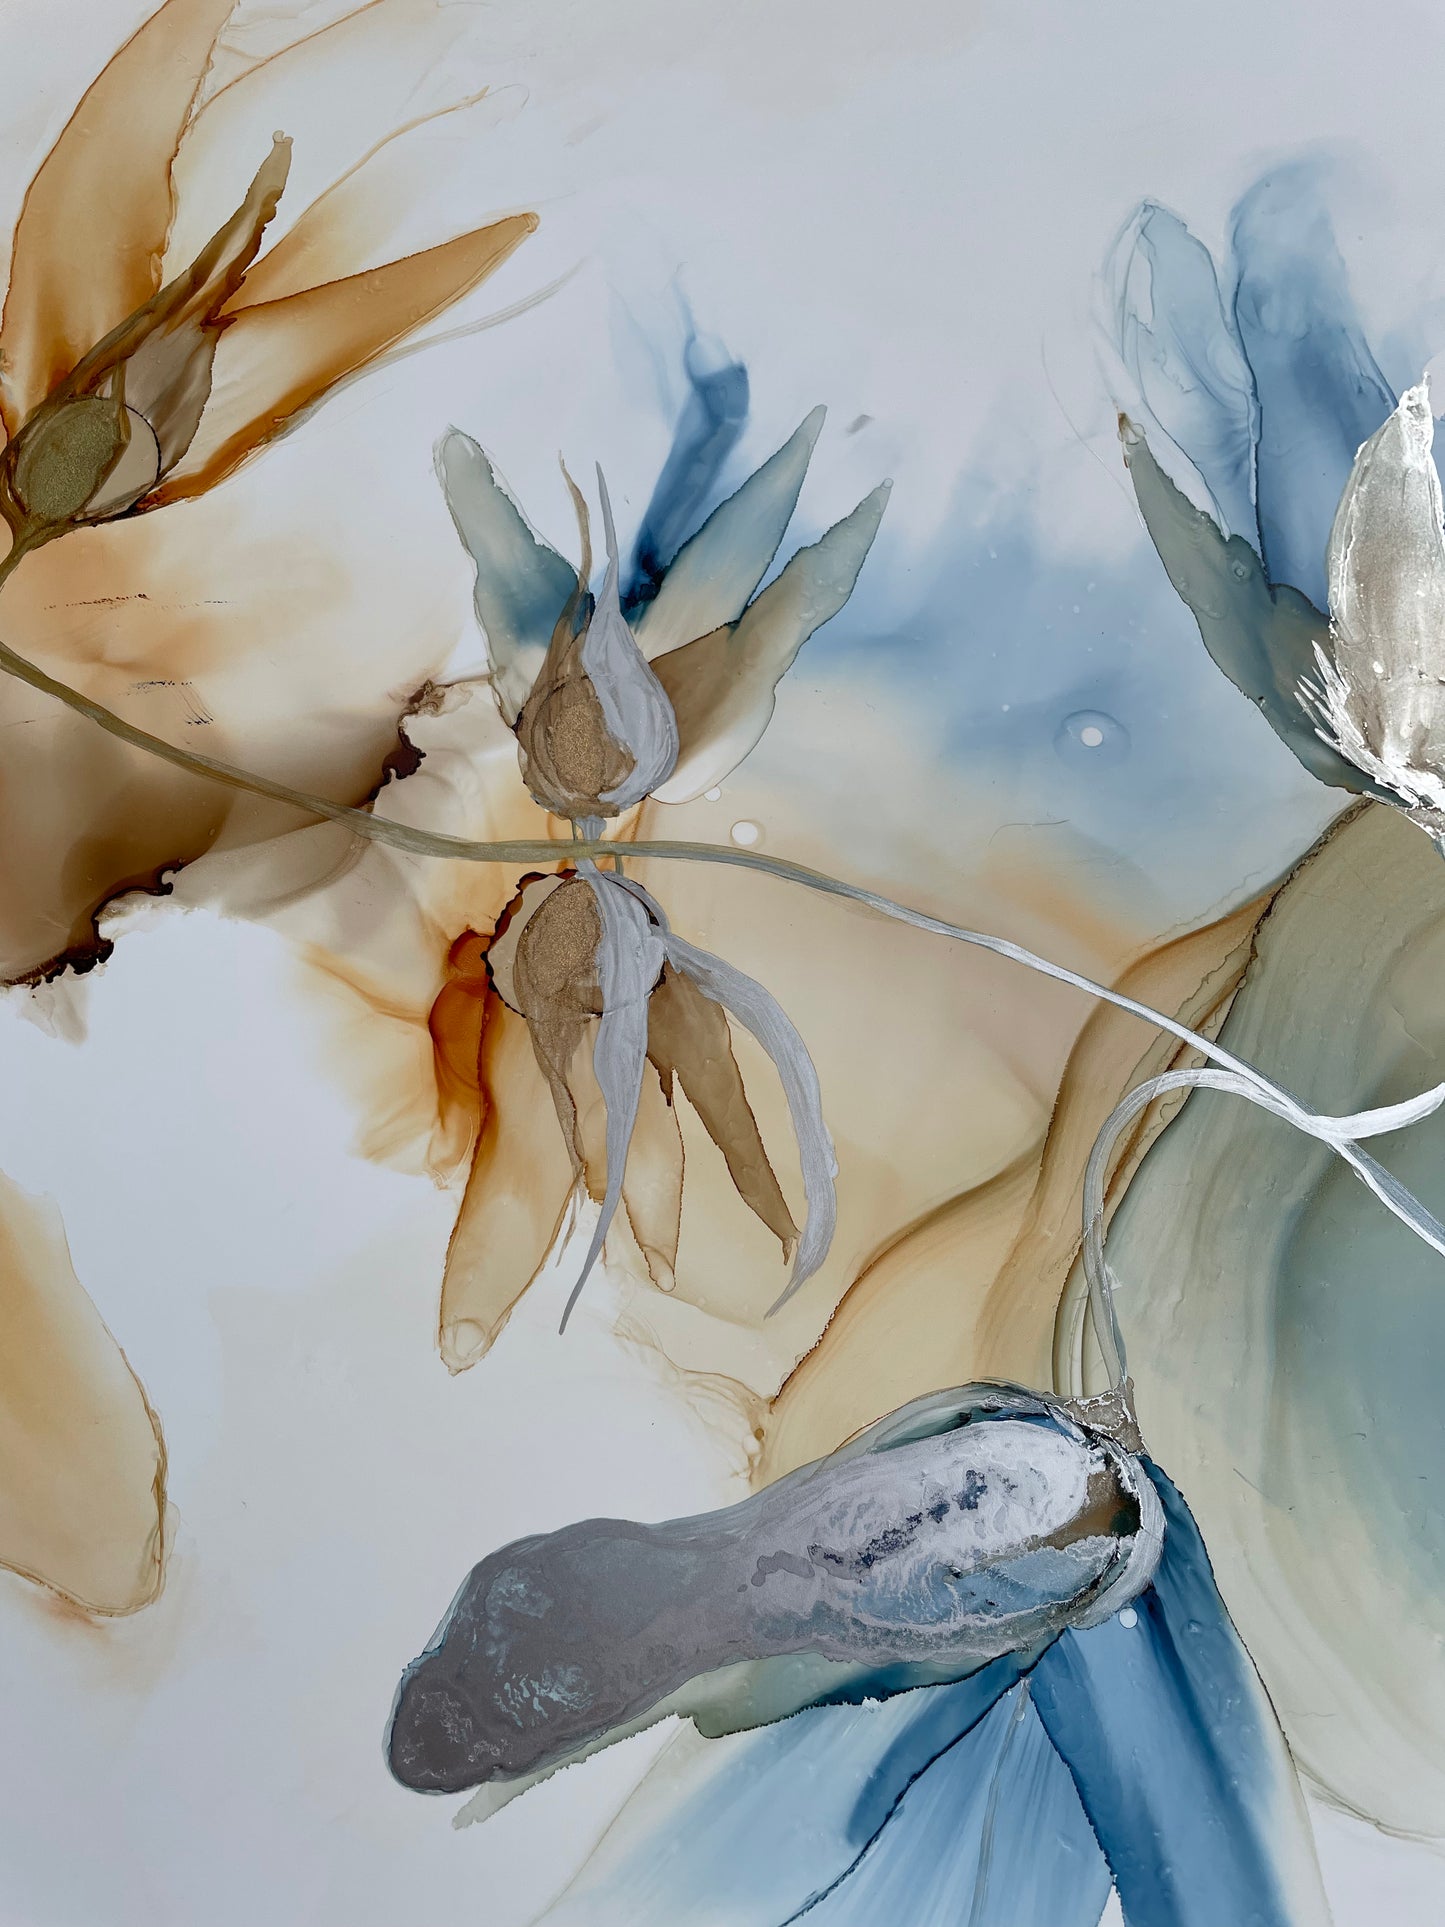 Fire and Ice - Original floral alcohol ink flowers in copper and blue.